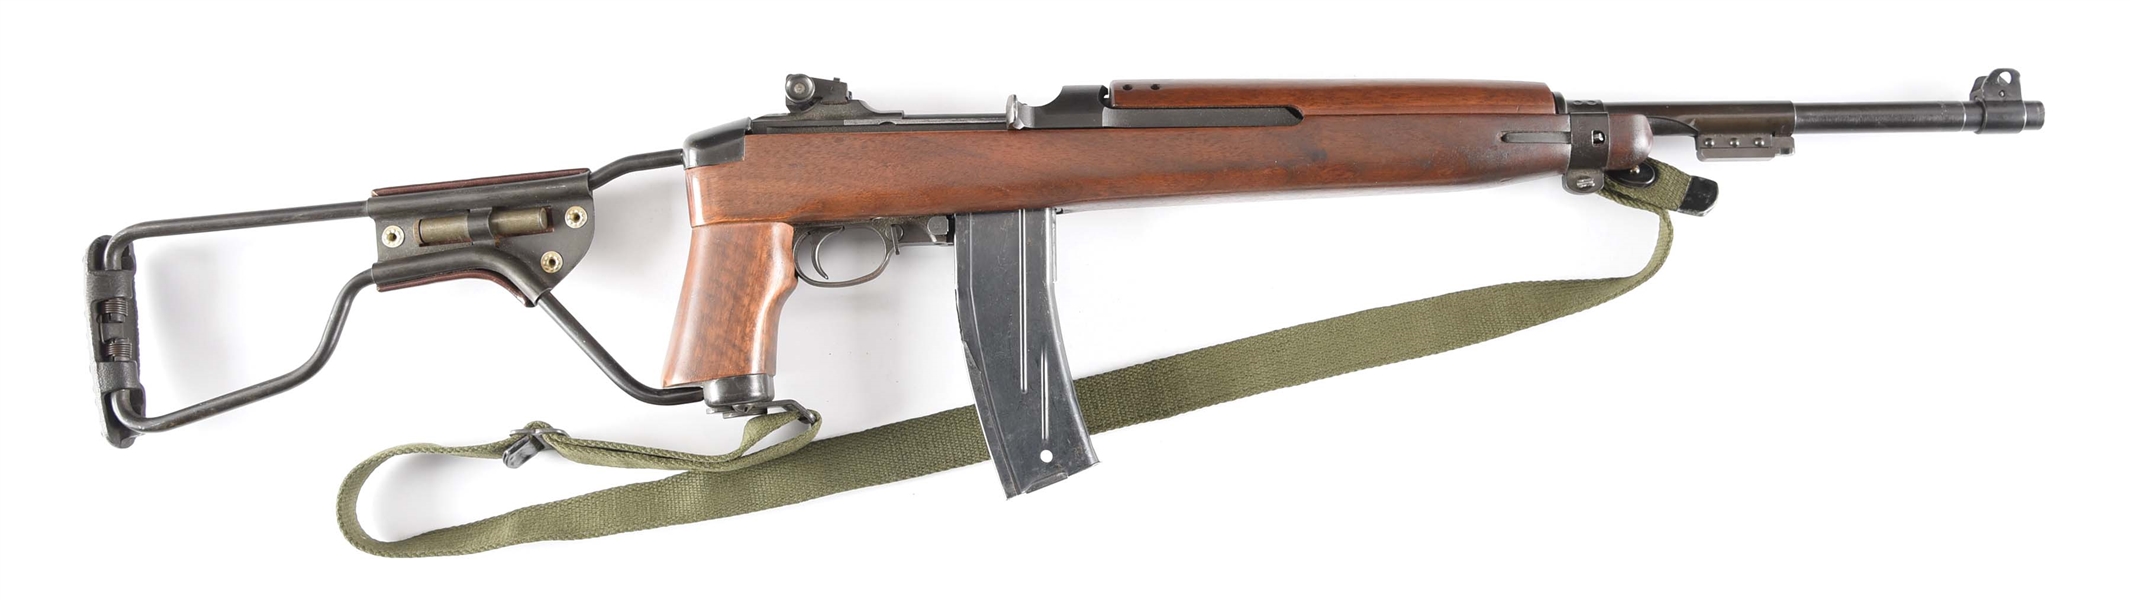 (N) POSTAL METER M1 CARBINE CONVERTED TO A MACHINE GUN (FULLY TRANSFERABLE).